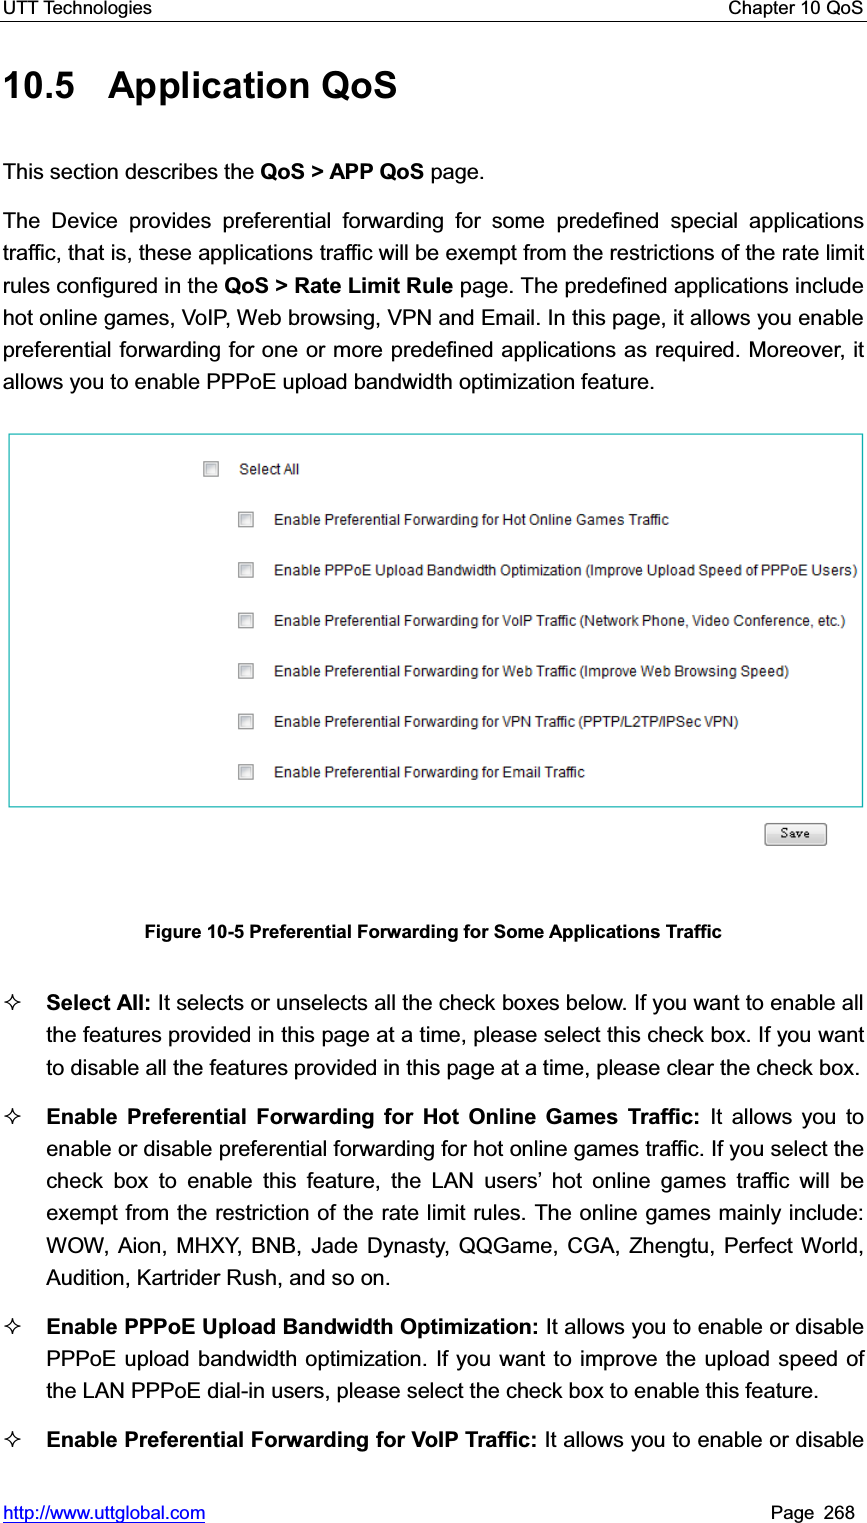 UTT Technologies    Chapter 10 QoS   http://www.uttglobal.com Page 268 10.5 Application QoS This section describes the QoS &gt; APP QoS page.   The Device provides preferential forwarding for some predefined special applications traffic, that is, these applications traffic will be exempt from the restrictions of the rate limit rules configured in the QoS &gt; Rate Limit Rule page. The predefined applications include hot online games, VoIP, Web browsing, VPN and Email. In this page, it allows you enable preferential forwarding for one or more predefined applications as required. Moreover, it allows you to enable PPPoE upload bandwidth optimization feature. Figure 10-5 Preferential Forwarding for Some Applications Traffic Select All: It selects or unselects all the check boxes below. If you want to enable all the features provided in this page at a time, please select this check box. If you want to disable all the features provided in this page at a time, please clear the check box.Enable Preferential Forwarding for Hot Online Games Traffic: It allows you to enable or disable preferential forwarding for hot online games traffic. If you select the check box to enable this feature, the LAN userV¶ hot online games traffic will be exempt from the restriction of the rate limit rules. The online games mainly include: WOW, Aion, MHXY, BNB, Jade Dynasty, QQGame, CGA, Zhengtu, Perfect World, Audition, Kartrider Rush, and so on. Enable PPPoE Upload Bandwidth Optimization: It allows you to enable or disable PPPoE upload bandwidth optimization. If you want to improve the upload speed of the LAN PPPoE dial-in users, please select the check box to enable this feature.   Enable Preferential Forwarding for VoIP Traffic: It allows you to enable or disable 